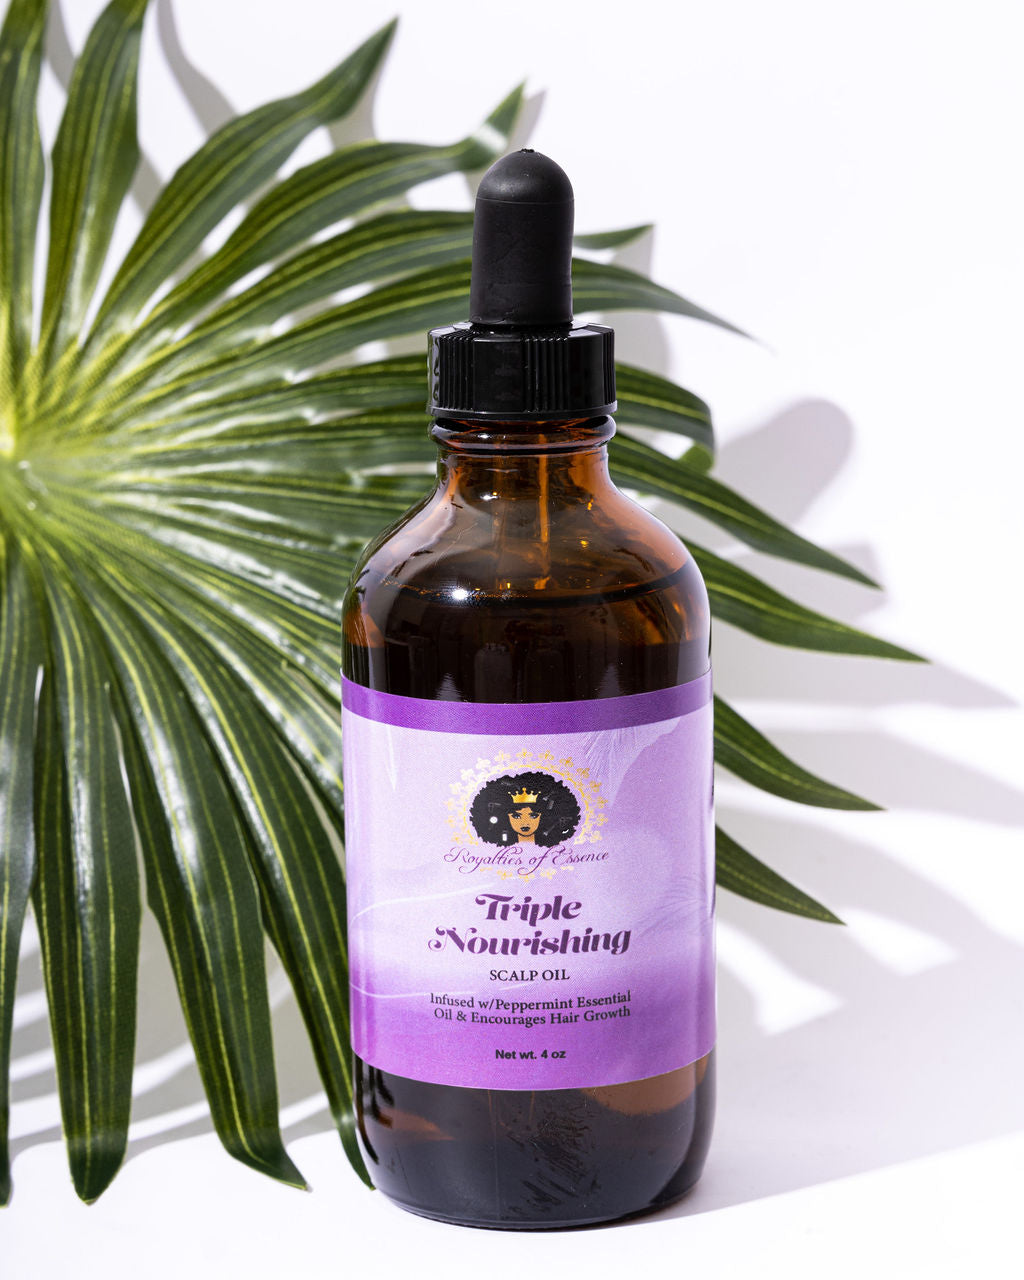 Our signature Triple Nourishing Scalp Oil is a nutrient-rich intensive formula meant to help you address your hair concerns.